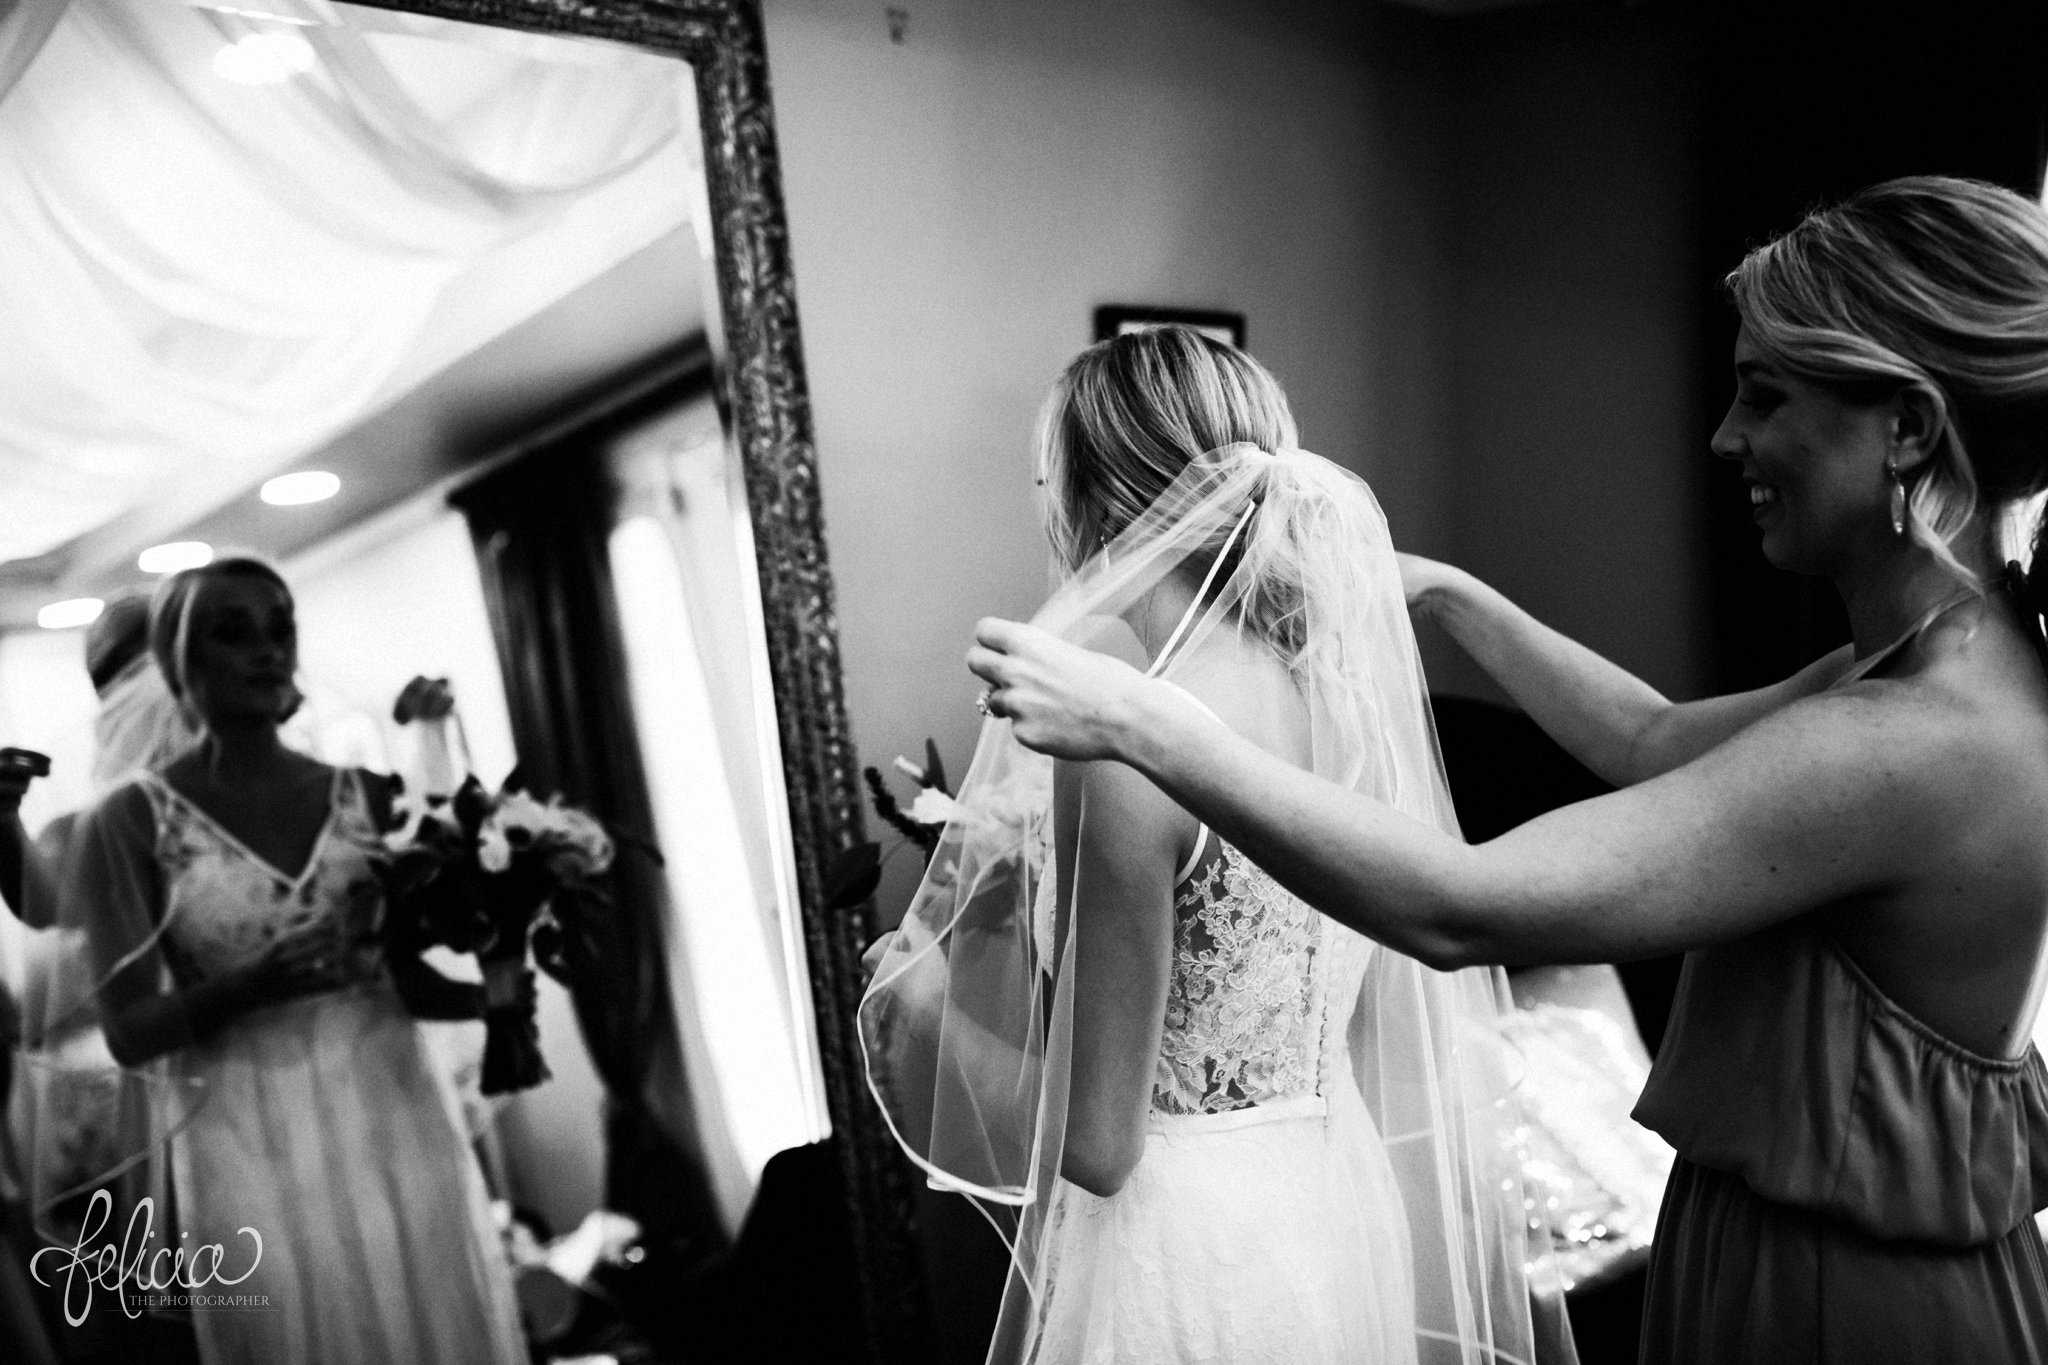 images by feliciathephotographer.com | destination wedding | the makey house | dave gibson coordinator | travel photographer | Savannah, georgia | southern | getting ready | details | veil | bridesmaid | black and white | lace dress | 